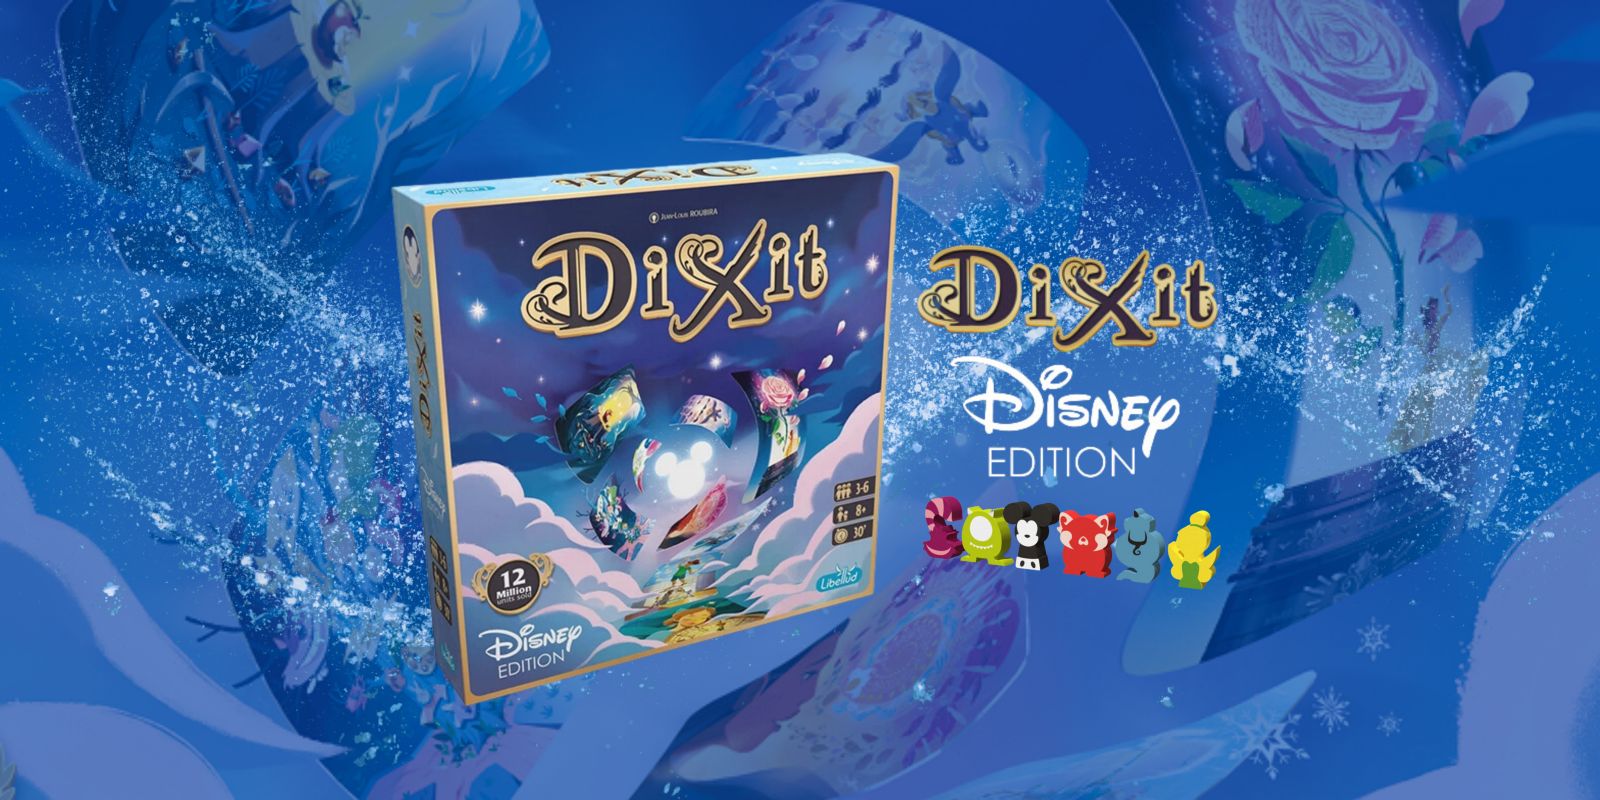 Dixit Collection - Gaming Library